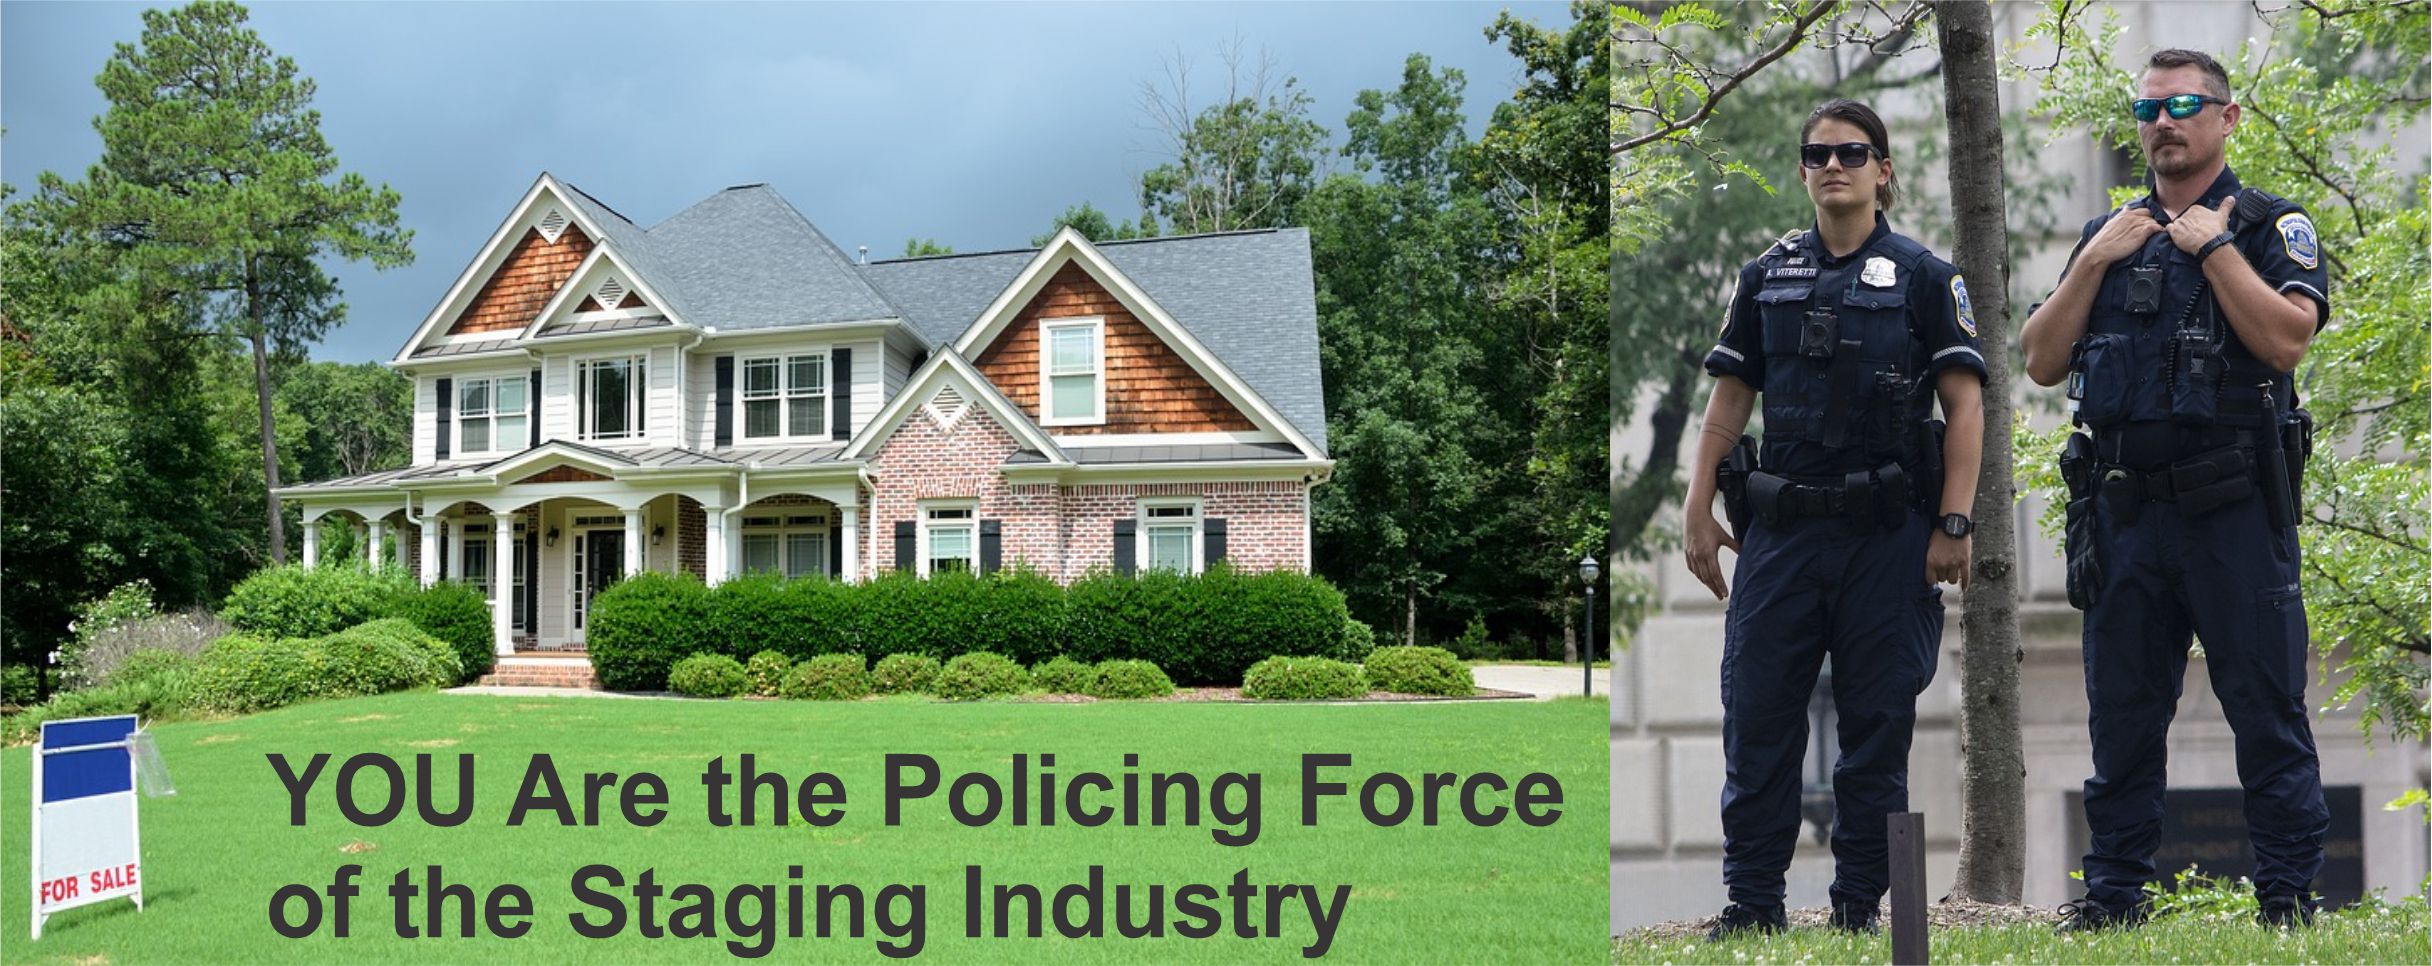 CSPs are the policing force of stagers